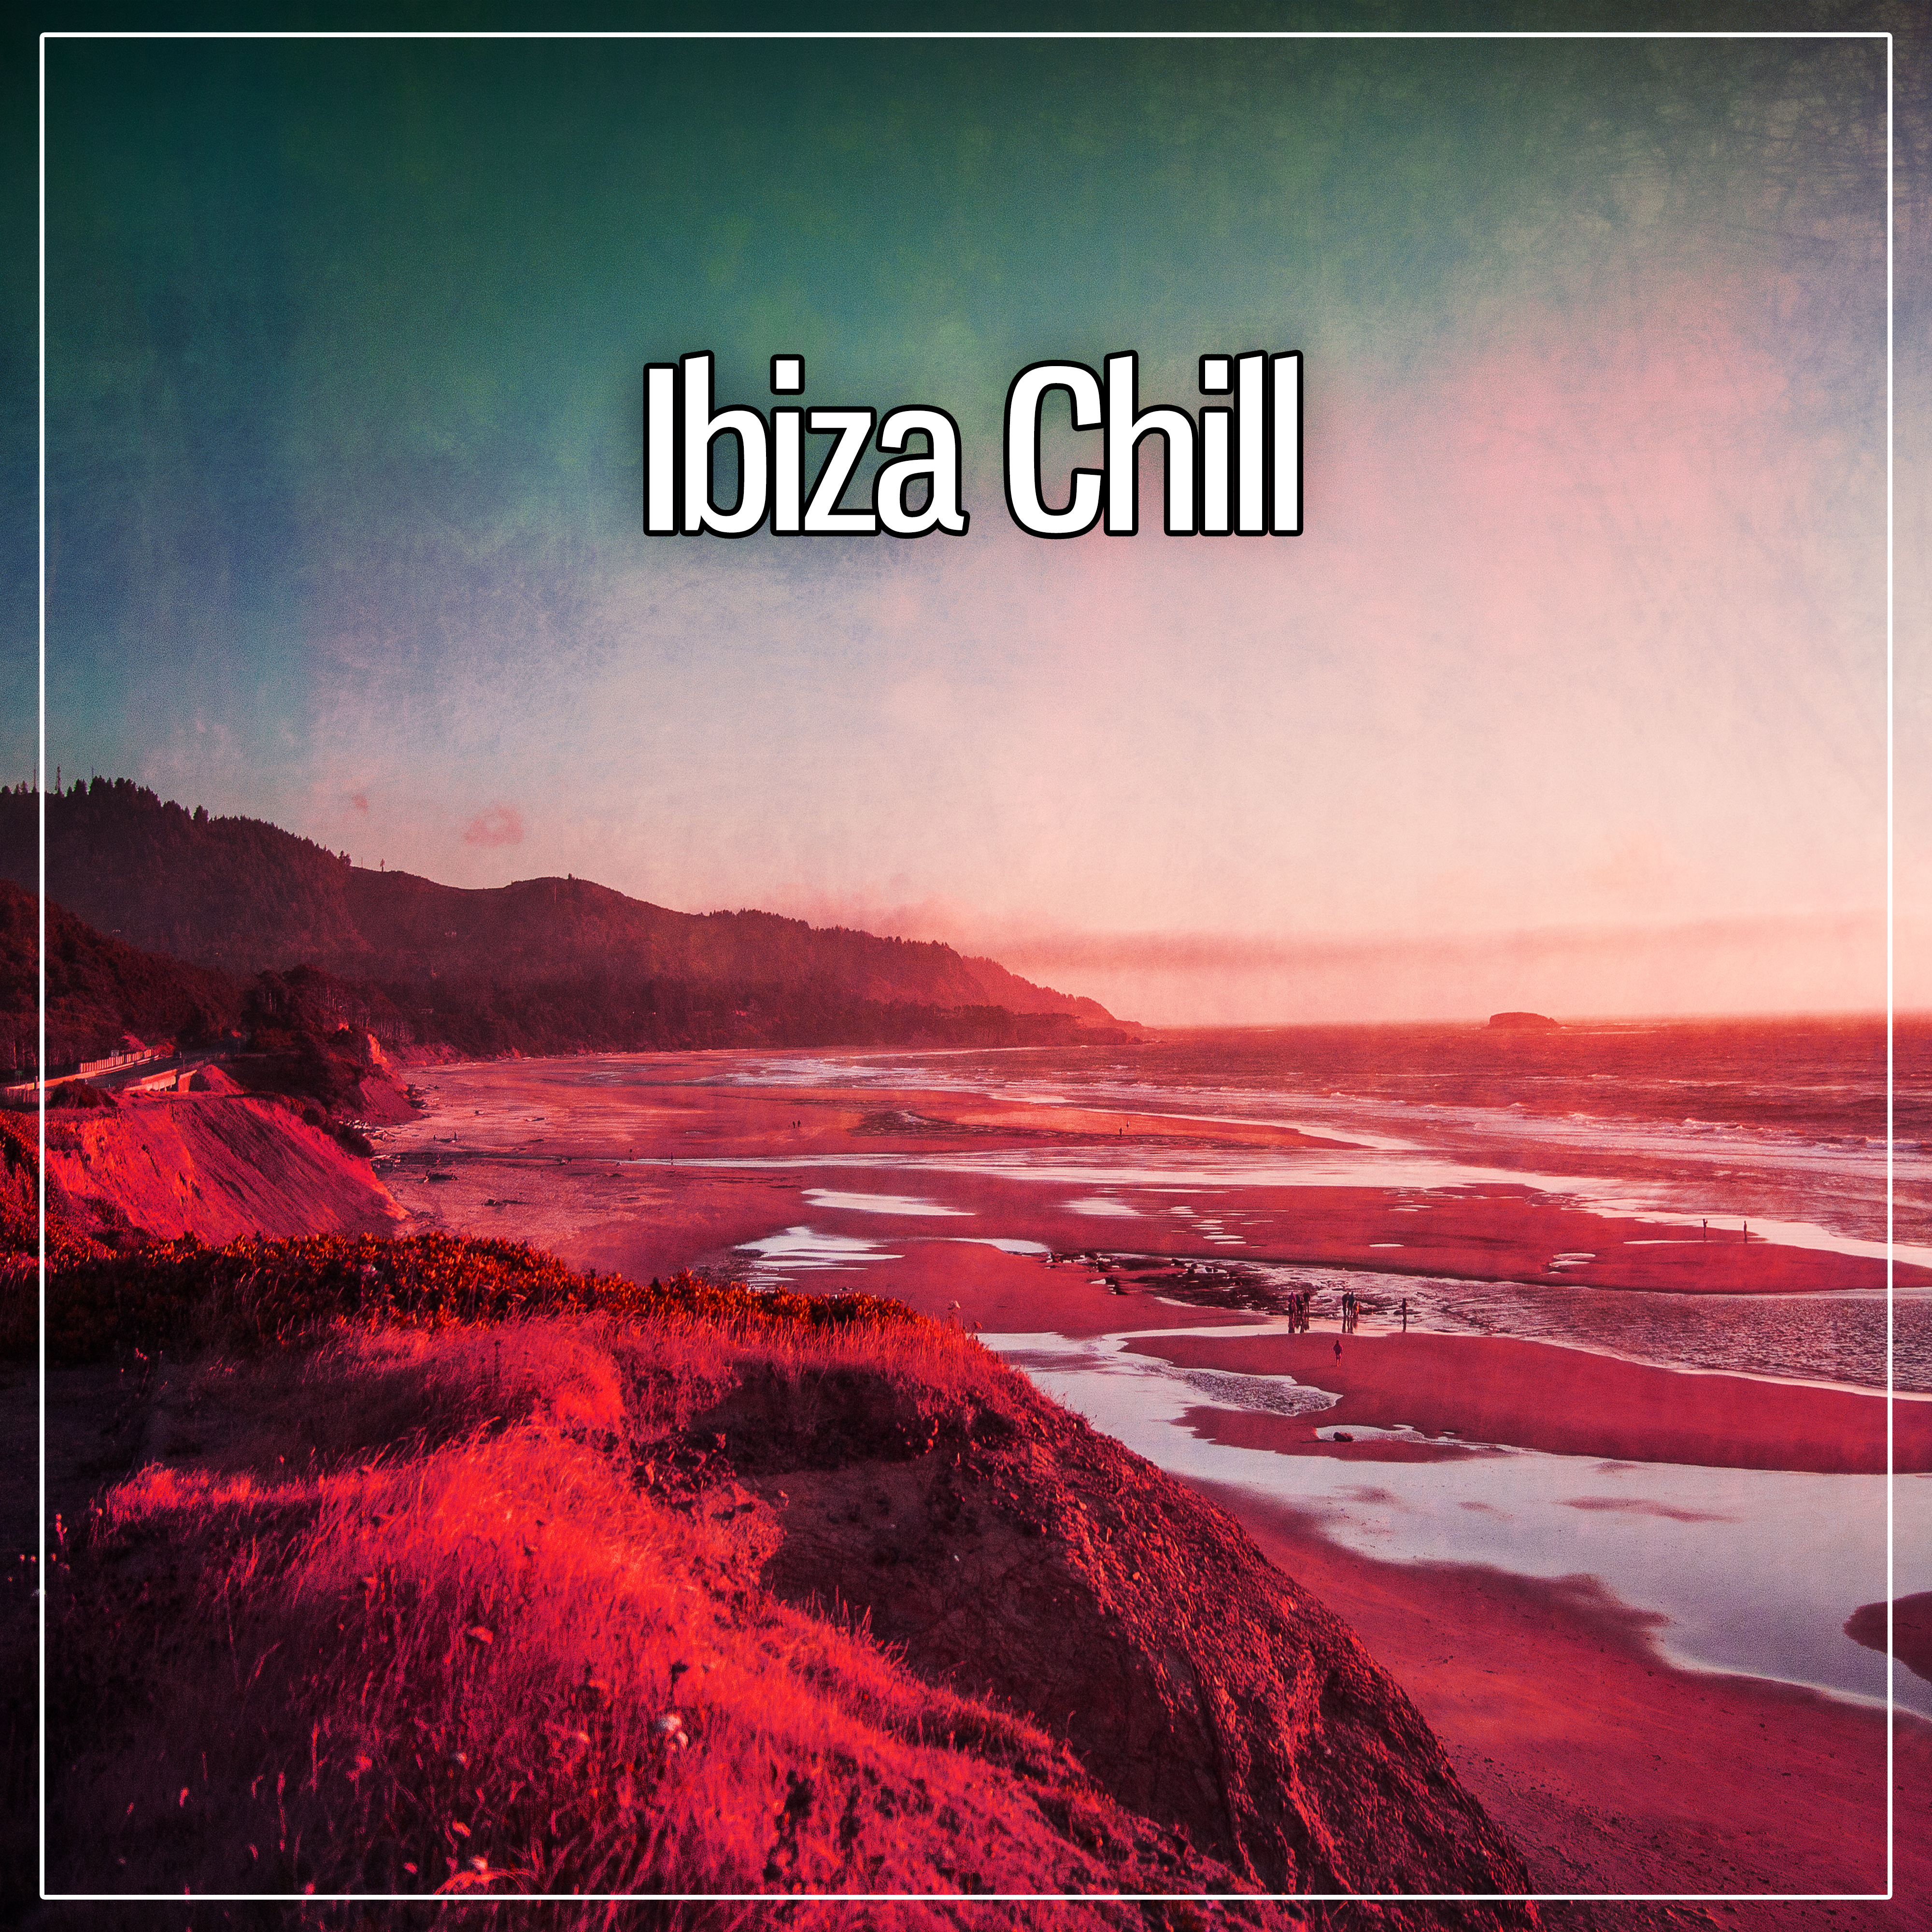 Ibiza Chill  Best Chillout Music, Party Time, Electronic Music, Beach Lounge,  Dance